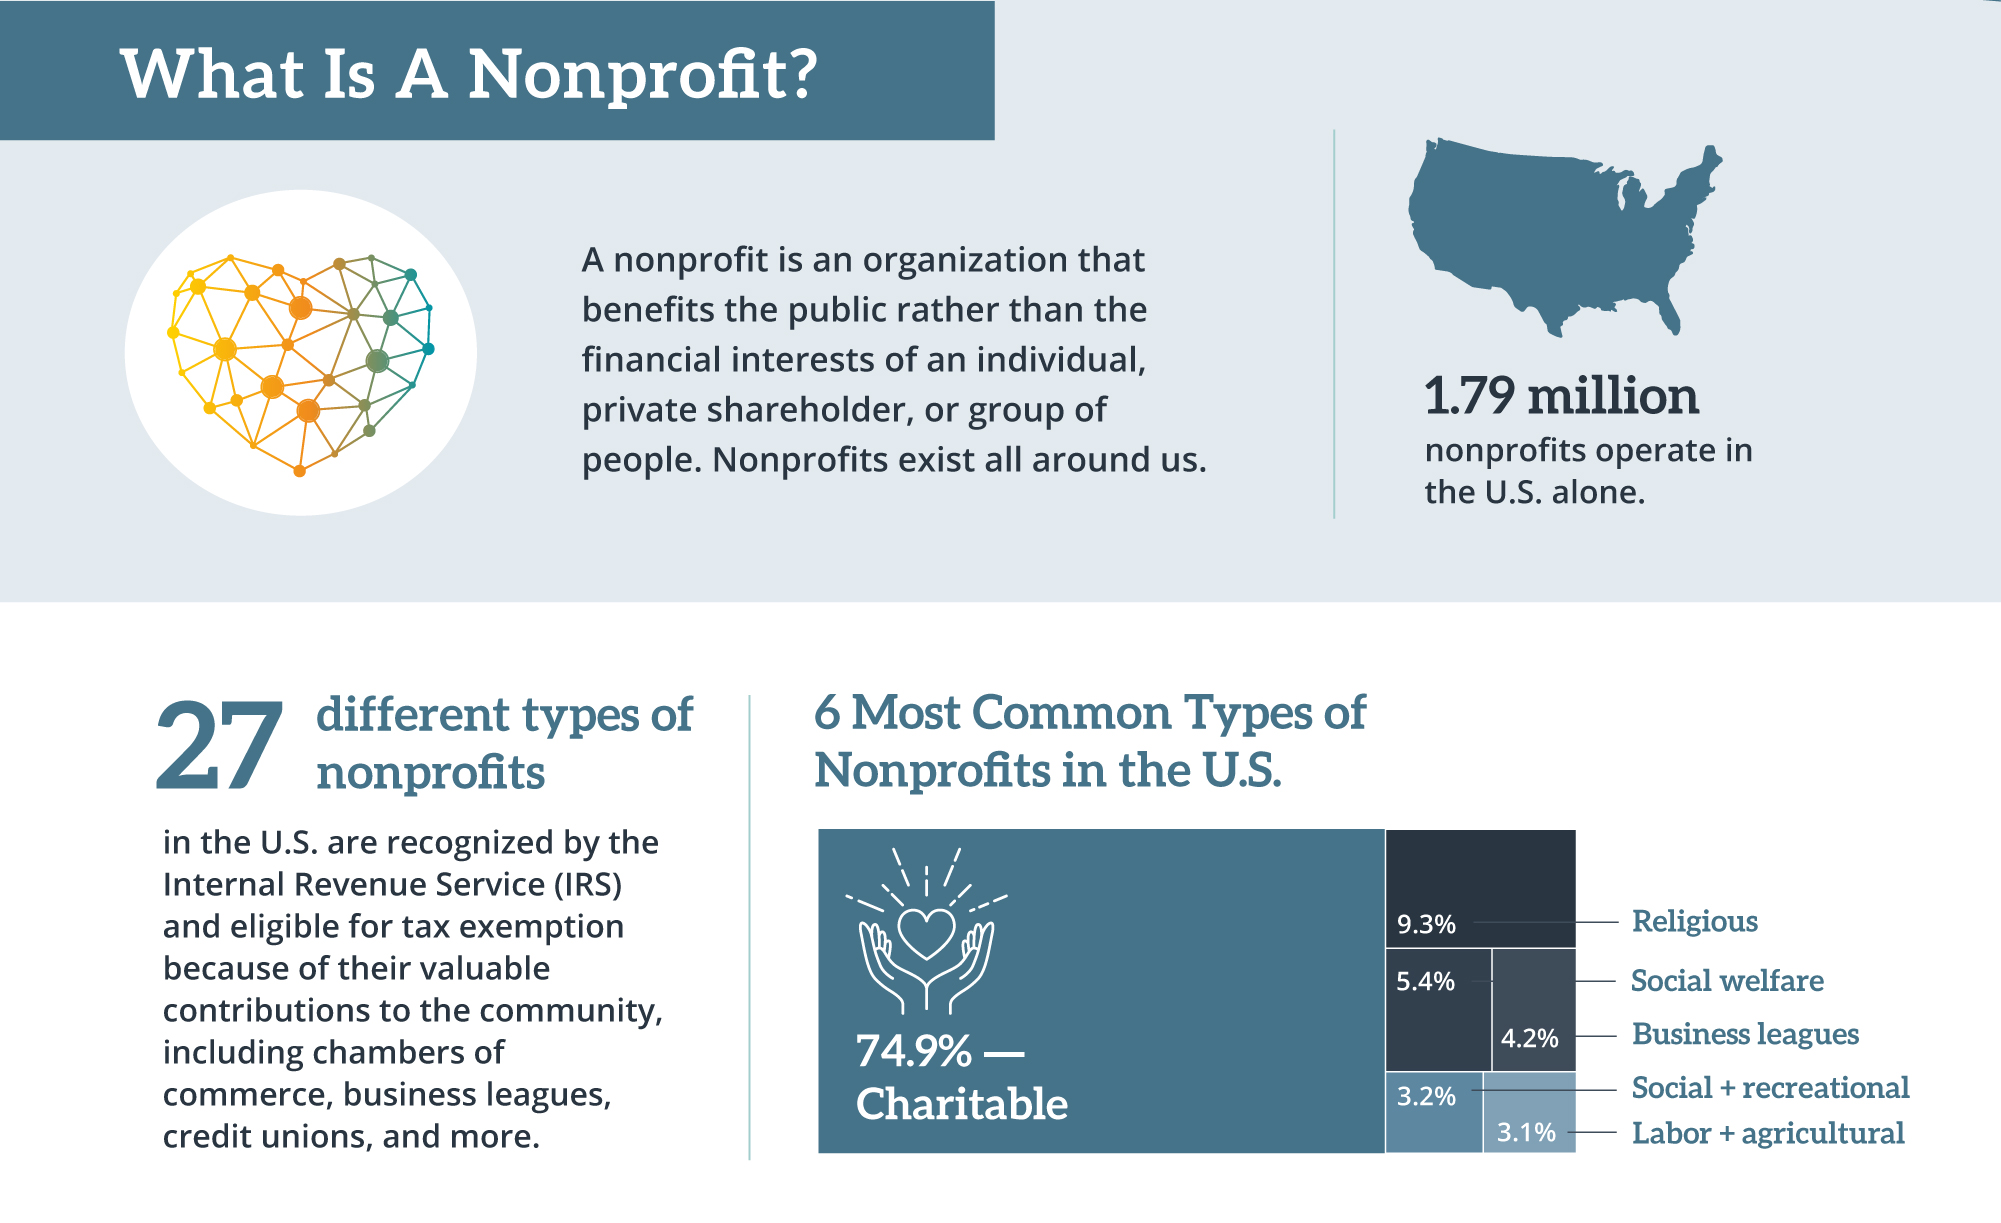 What is a nonprofit?